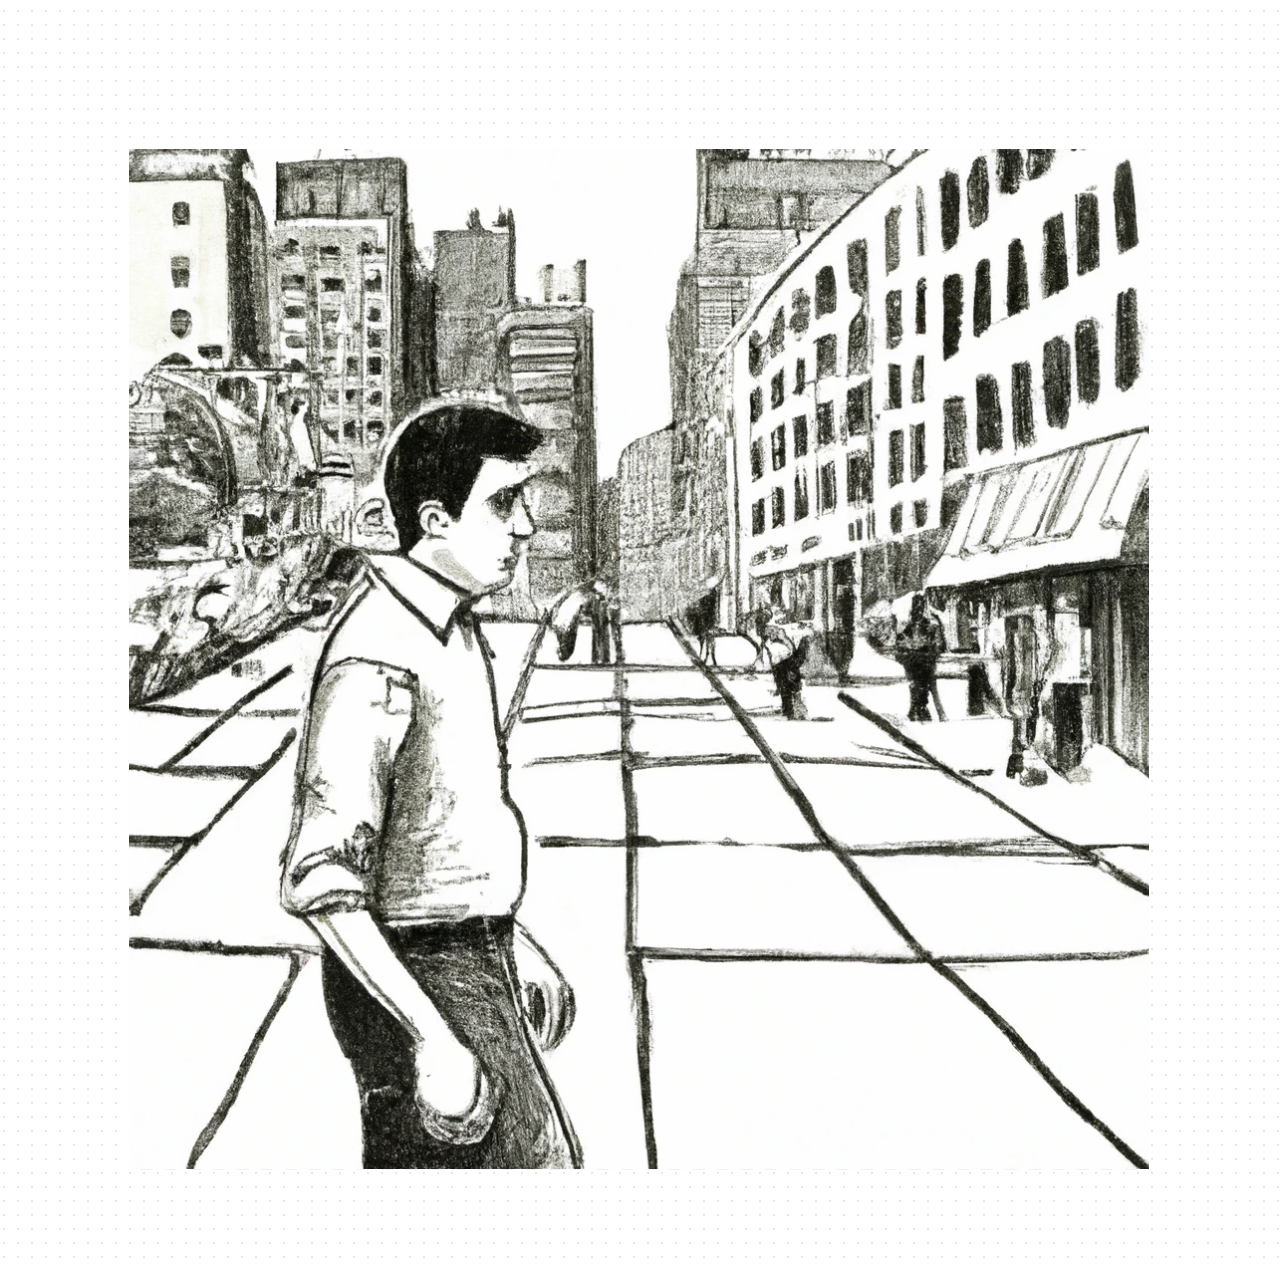 Dall-e2 Query: hatching style, man walking in city, looking down street, contemplation